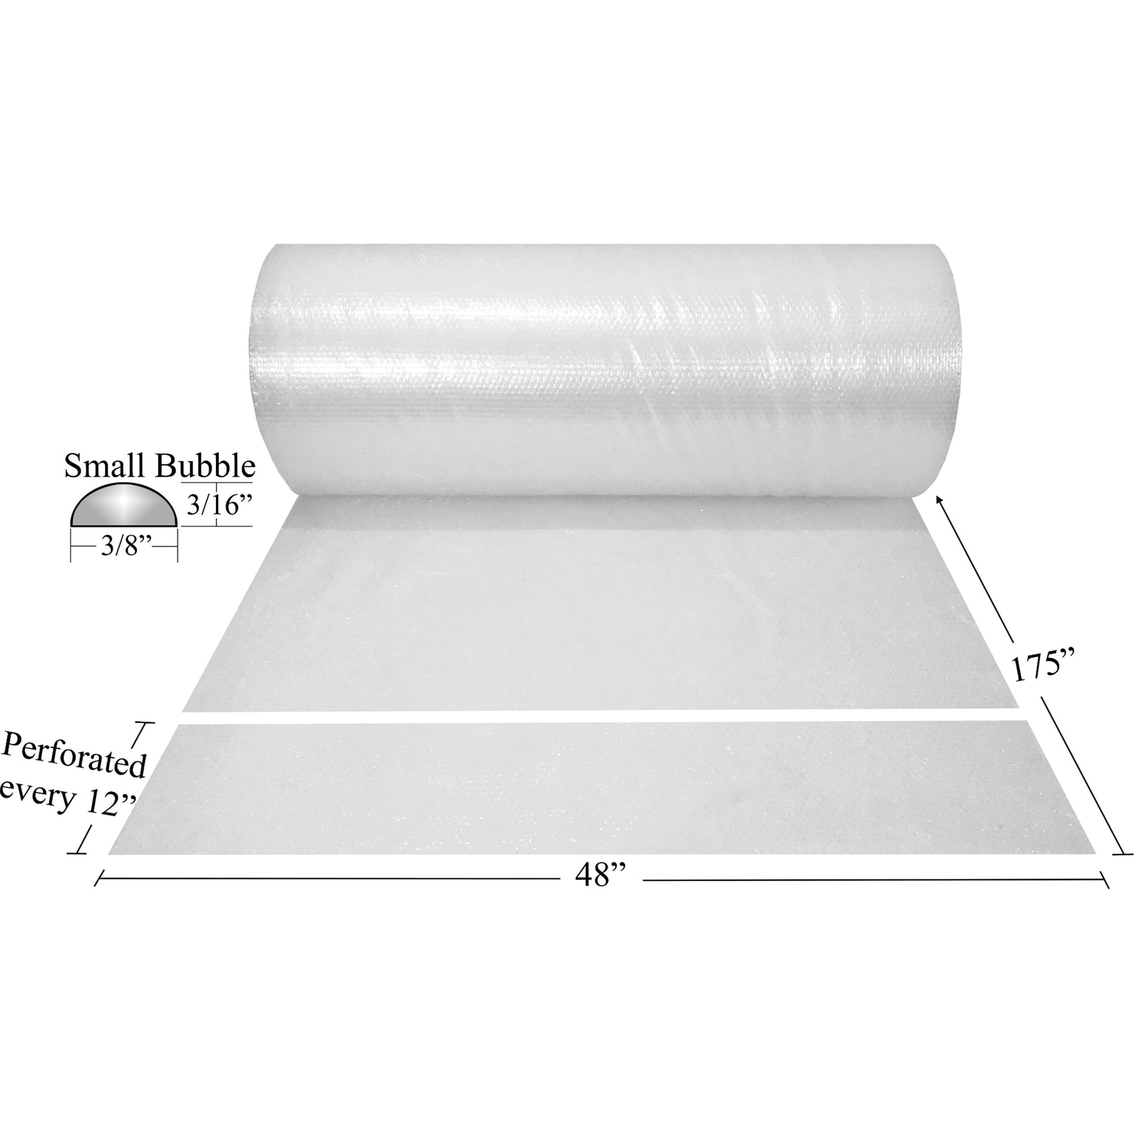 uBoxes Bubble Cushioning 48 in. Wide x 175 ft. Small Bubbles 3/16 in. - Image 2 of 2